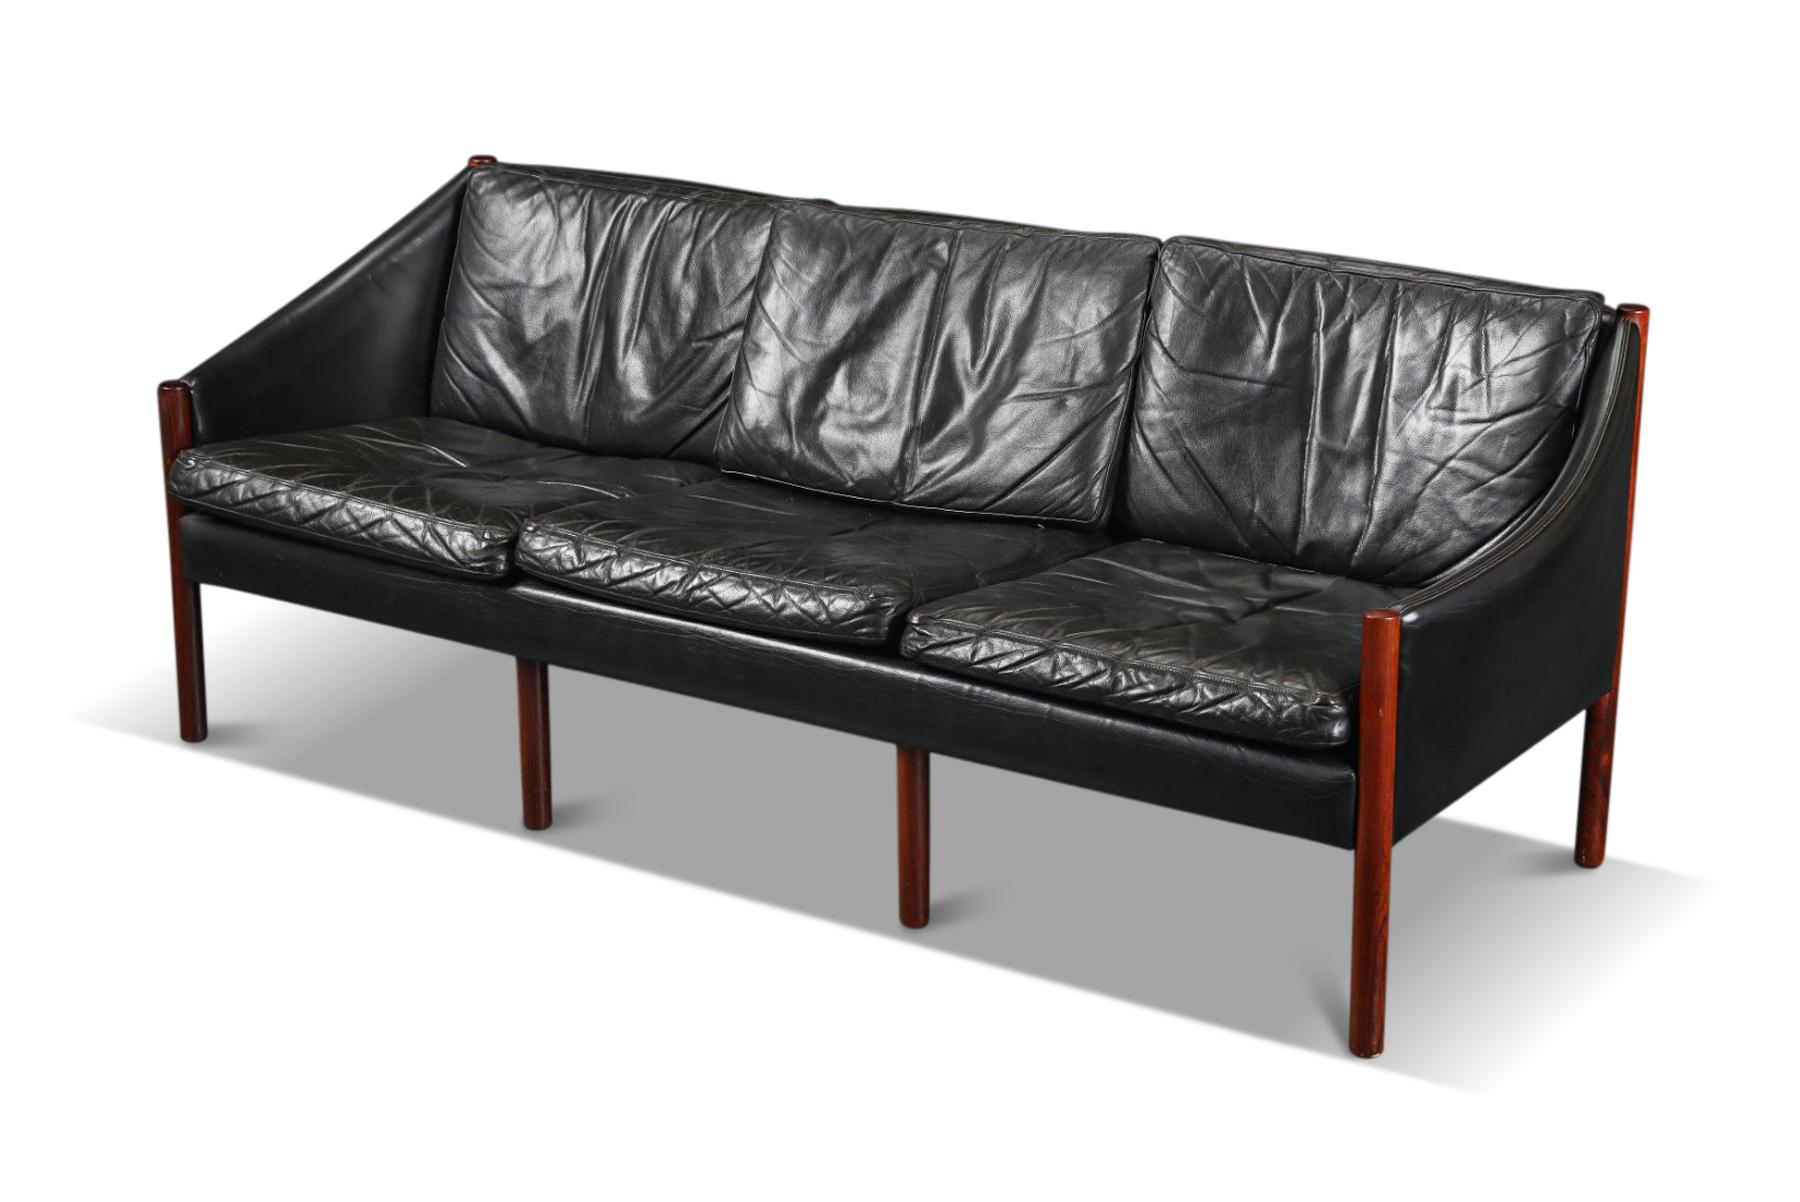 Other Unique Danish Modern Sofa in Rosewood + Black Leather